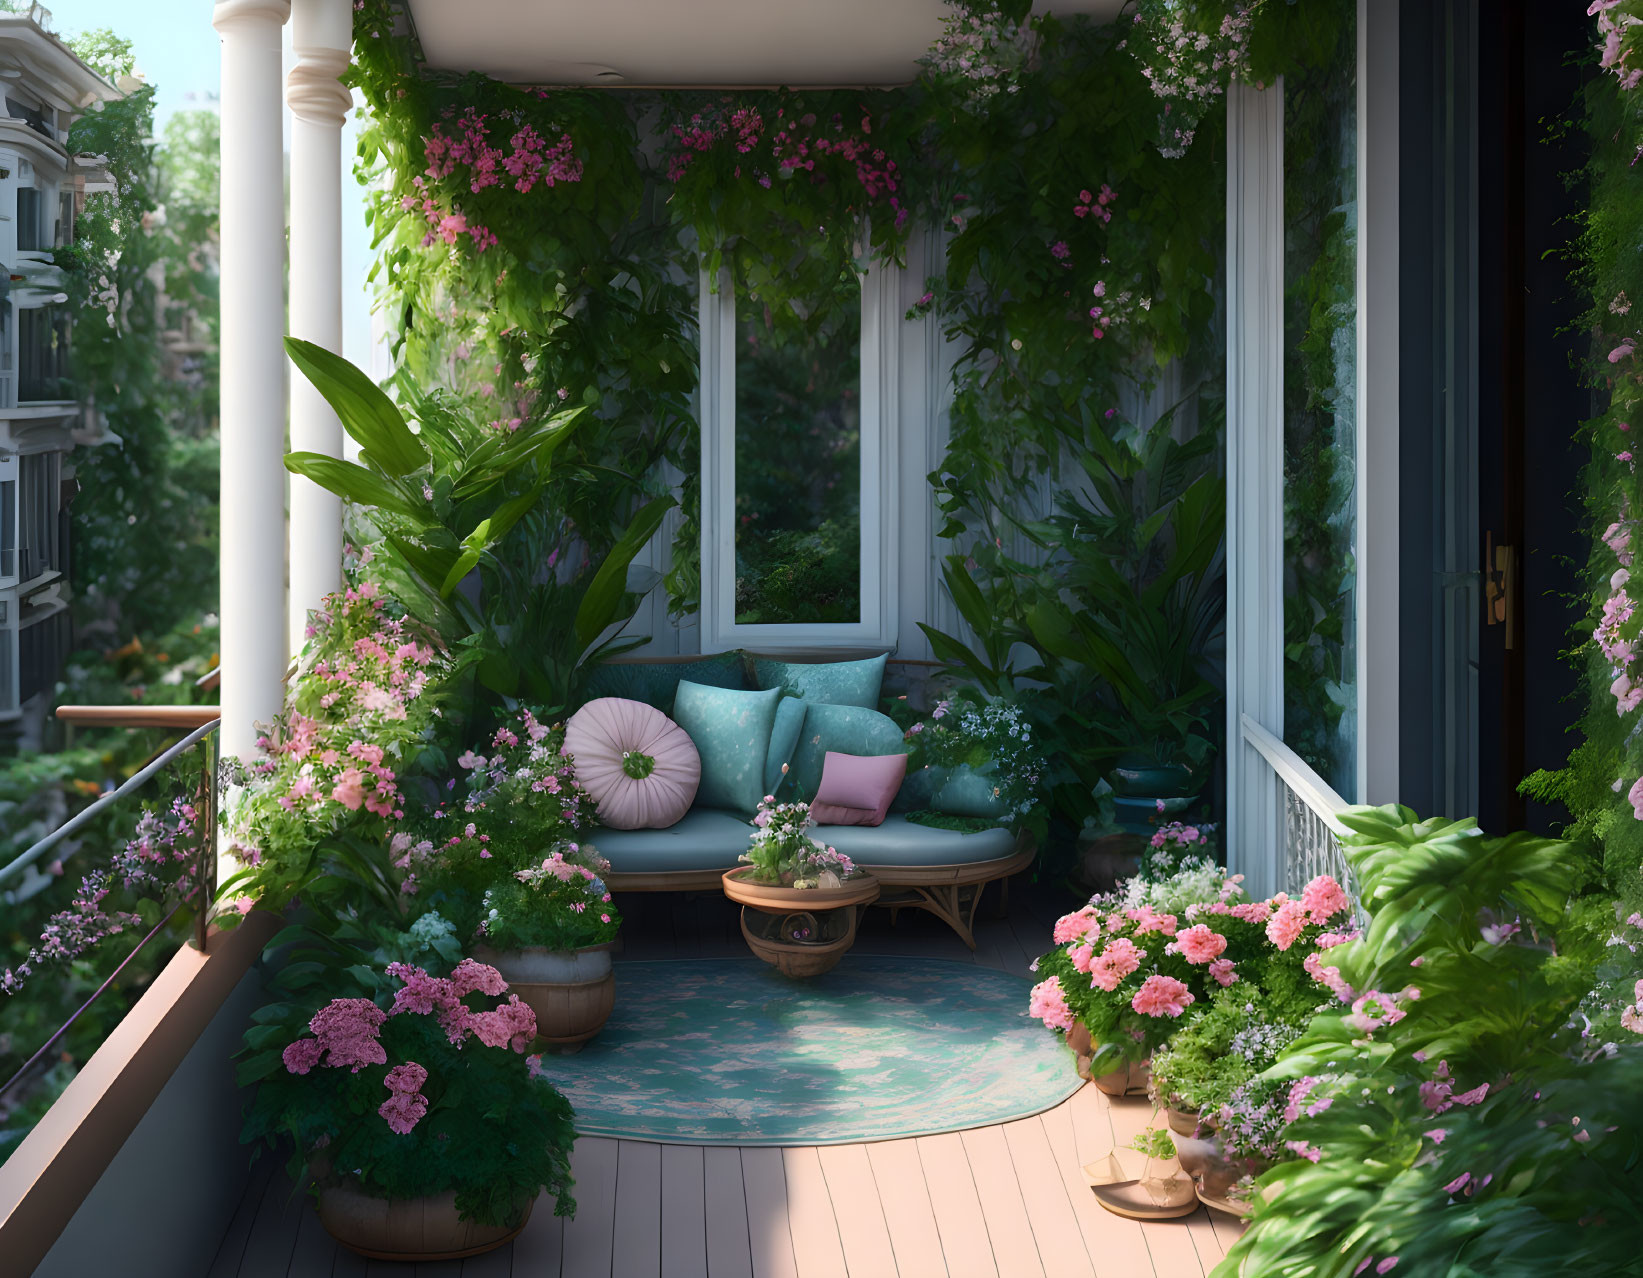 Balcony garden with daybed, vibrant pillows, pink flowers, green plants, urban view